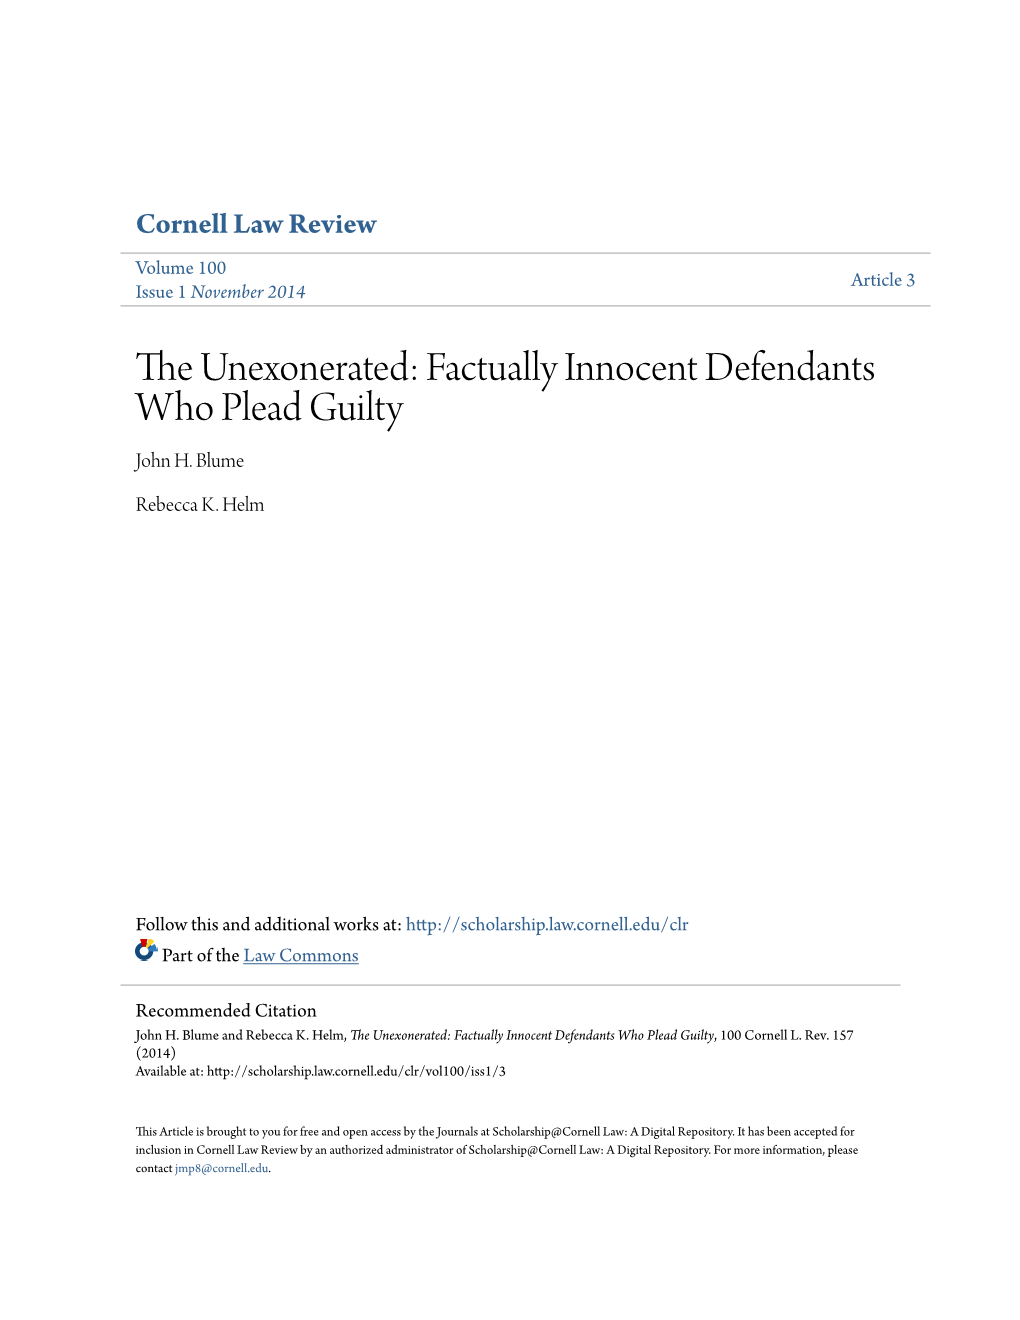 The Unexonerated: Factually Innocent Defendants Who Plead Guilty, 100 Cornell L